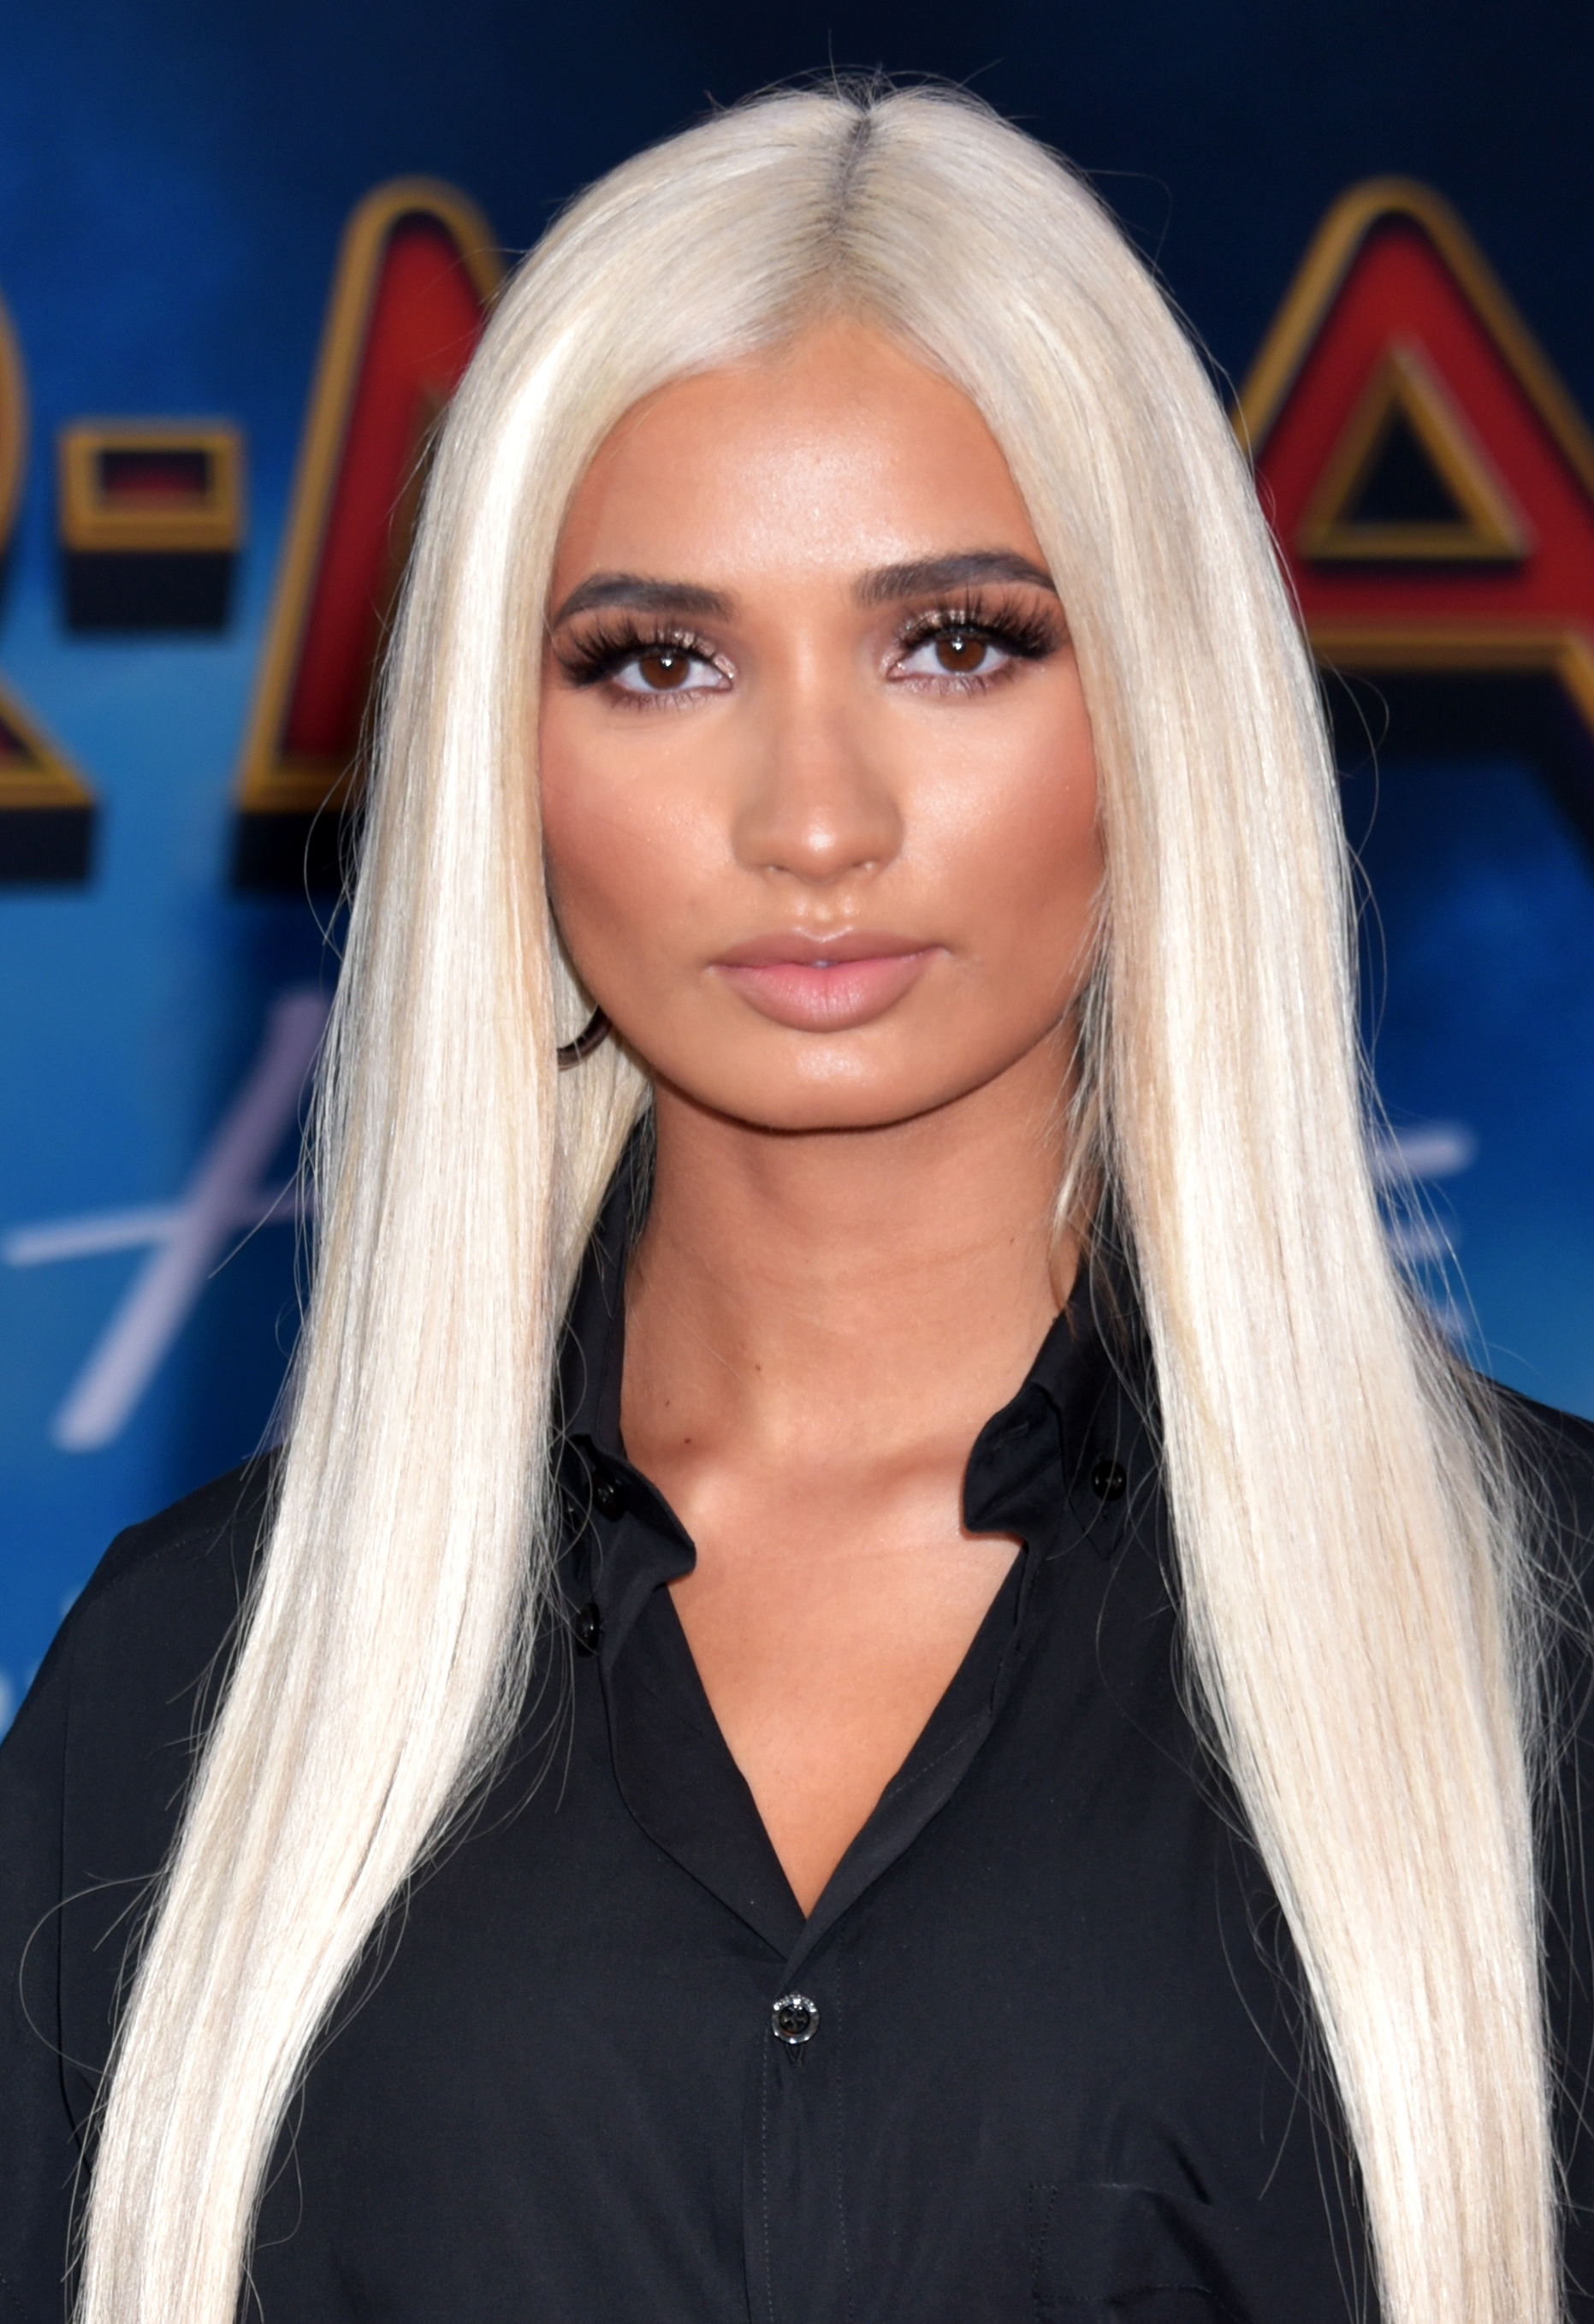 The 27-year old daughter of father Peter Perez Jr and mother Angela Terlaje Perez Pia Mia in 2024 photo. Pia Mia earned a  million dollar salary - leaving the net worth at 1 million in 2024